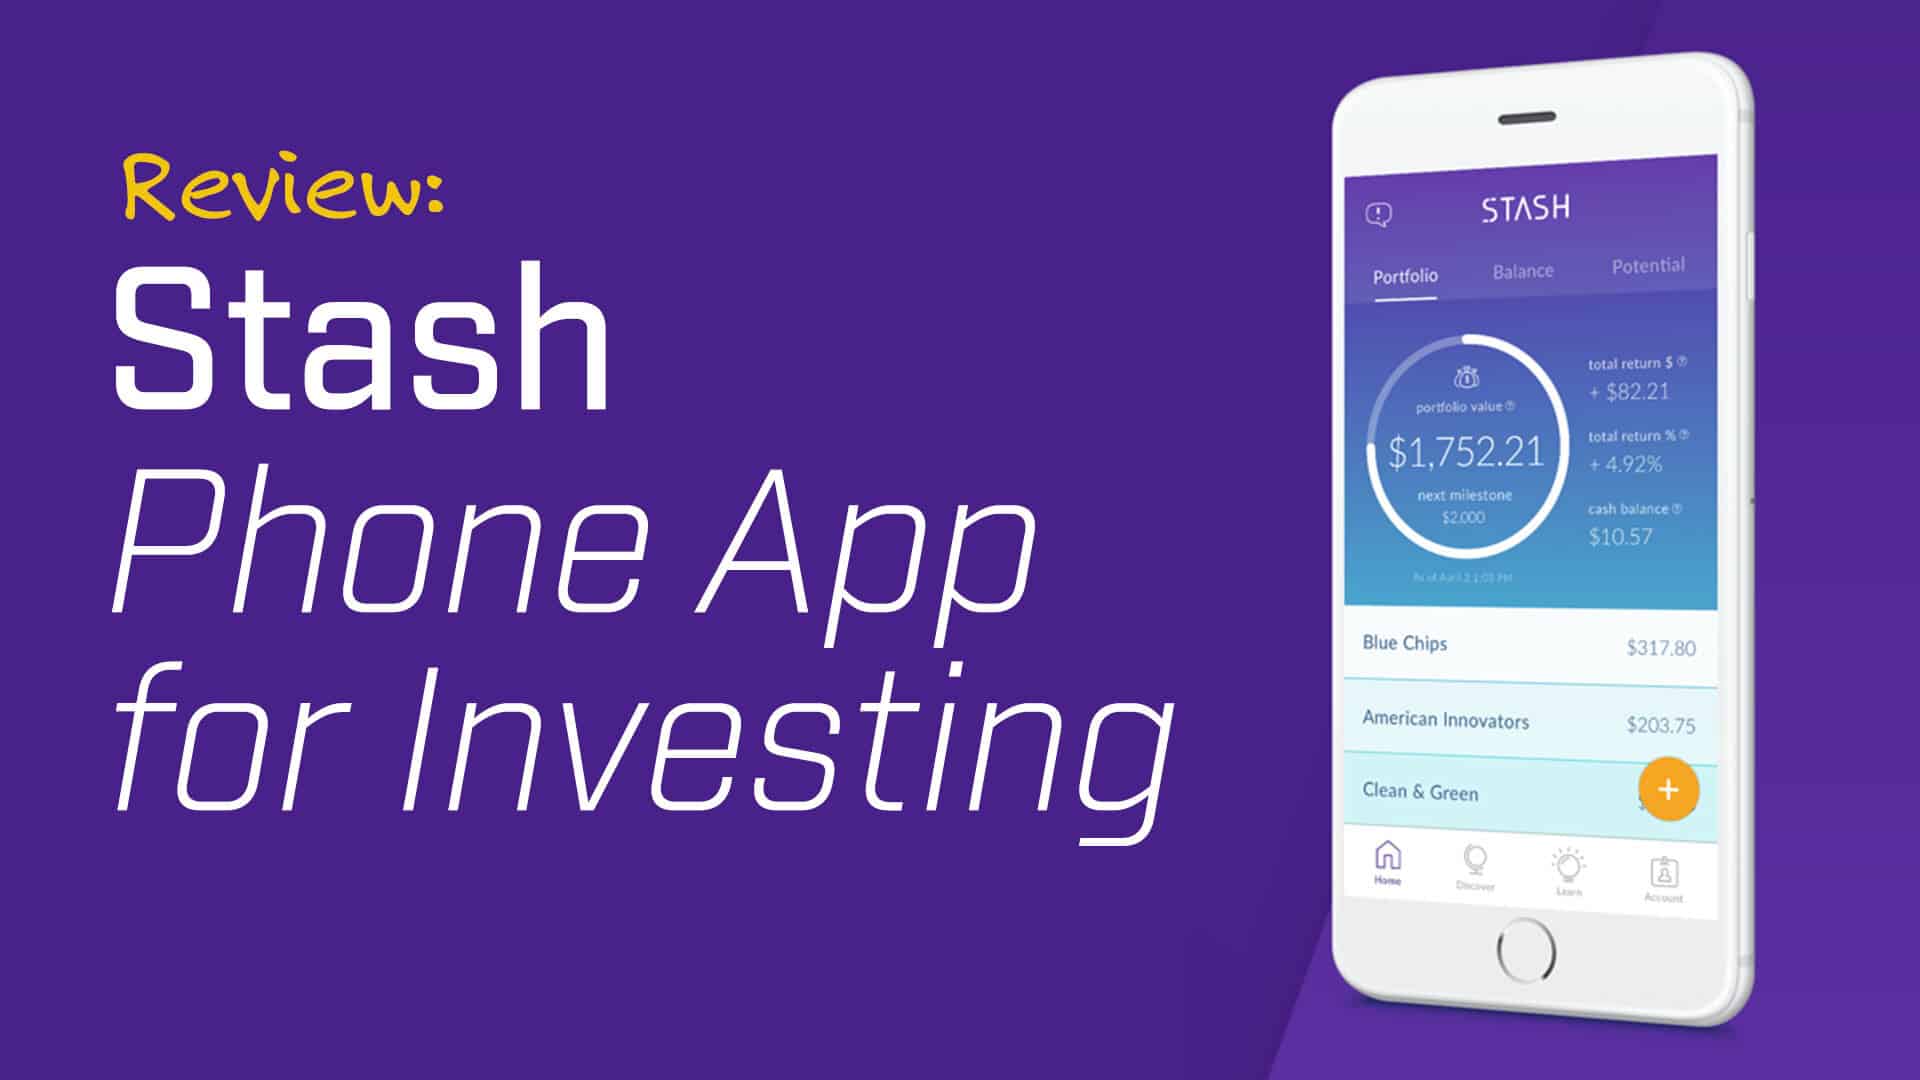 Review: Stash Phone App for Investing